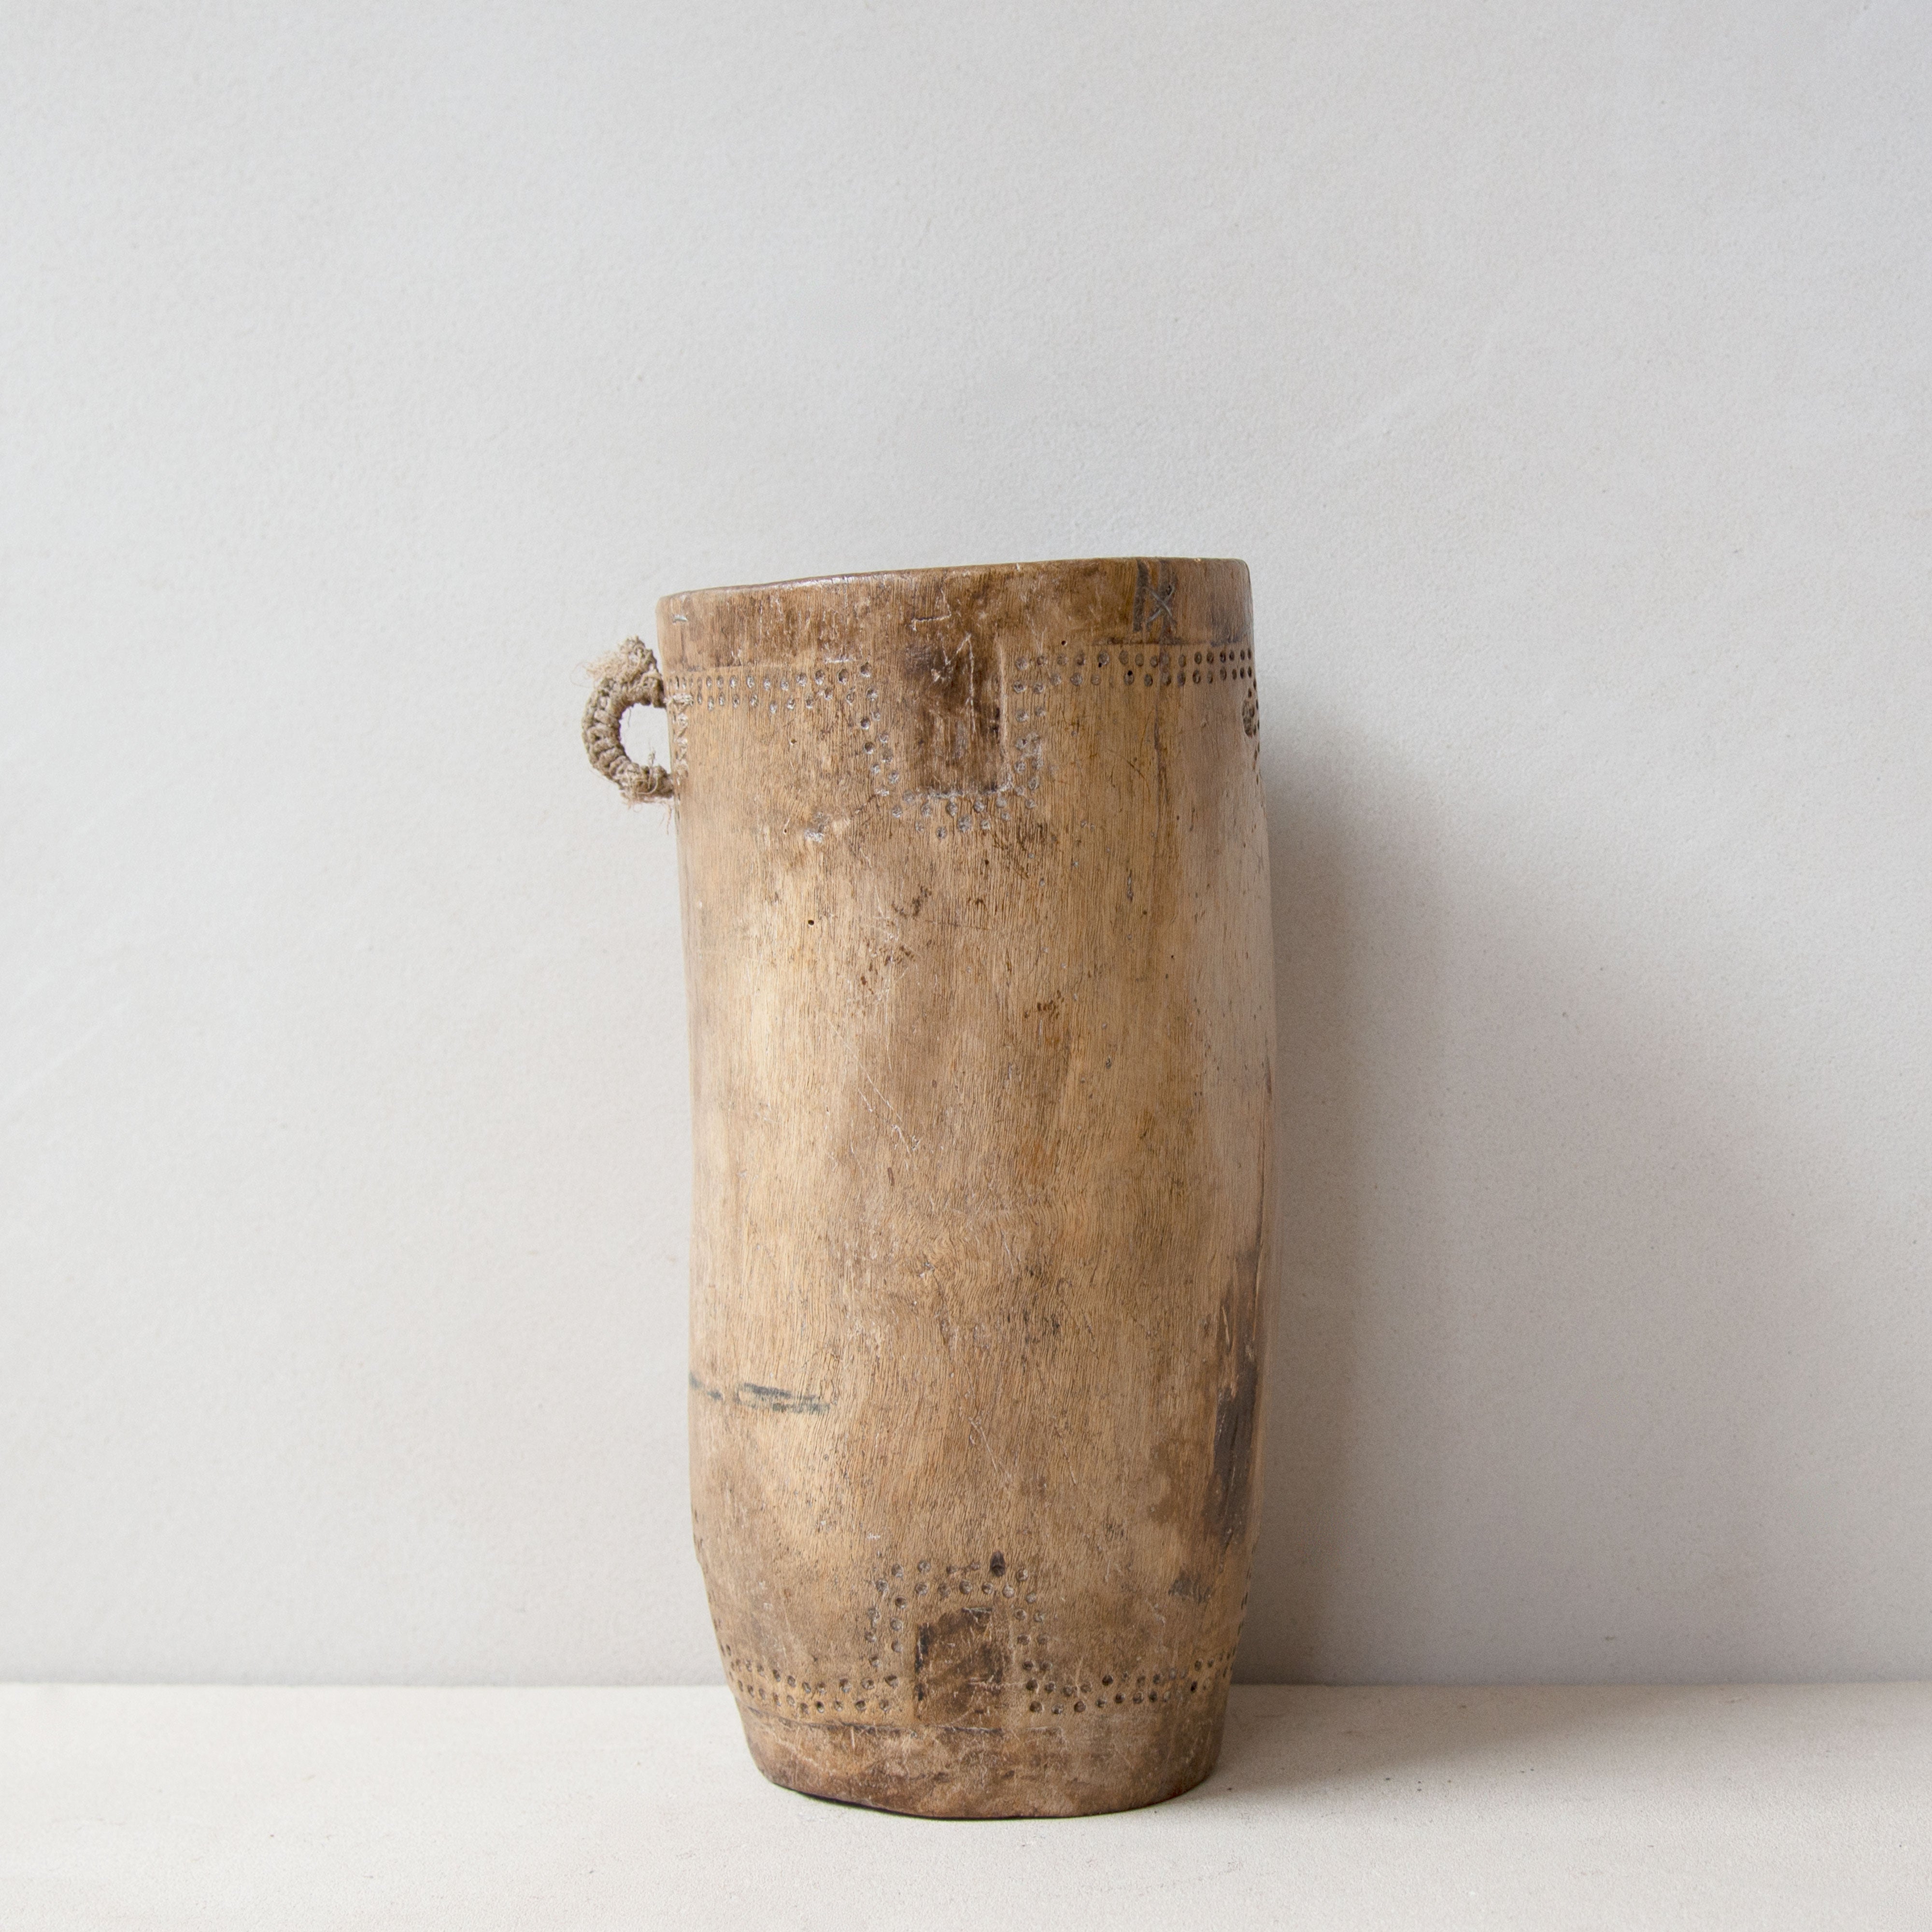 Hand-carved wooden Turkana container No.16